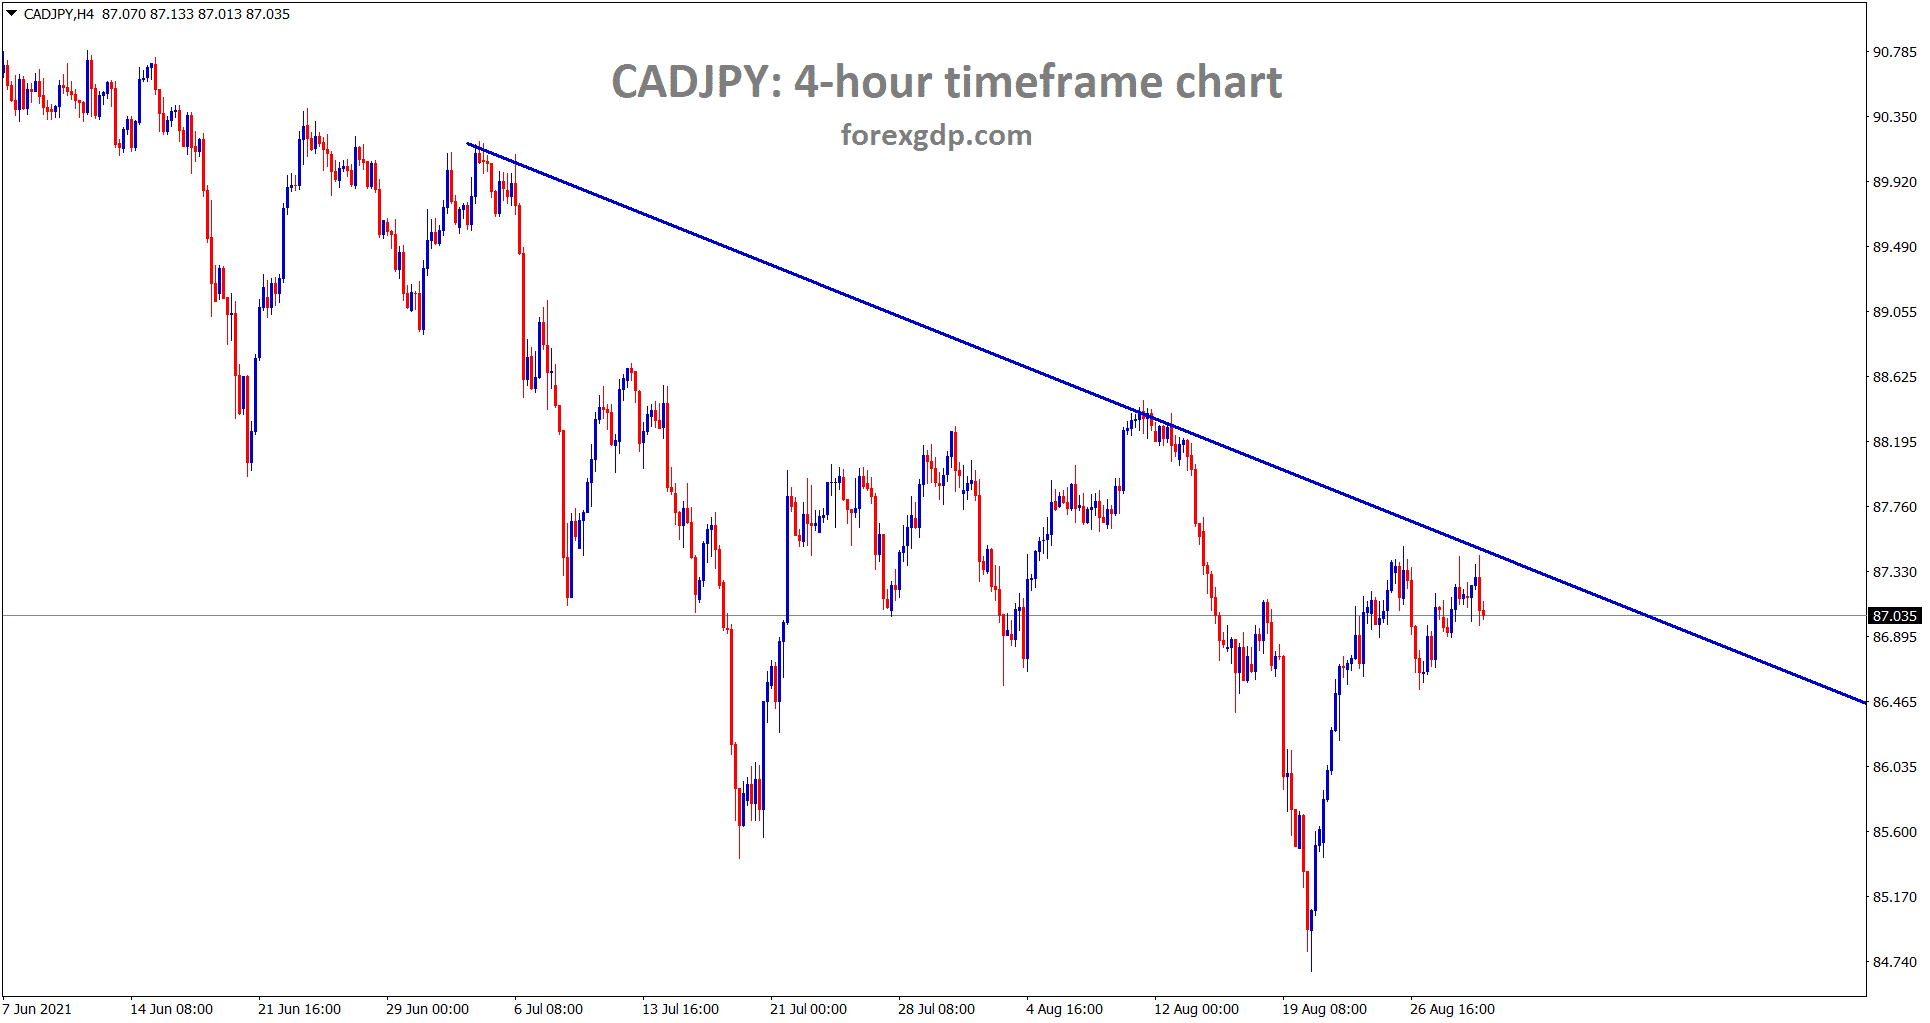 CADJPY reached the lower high area of the downtrend line